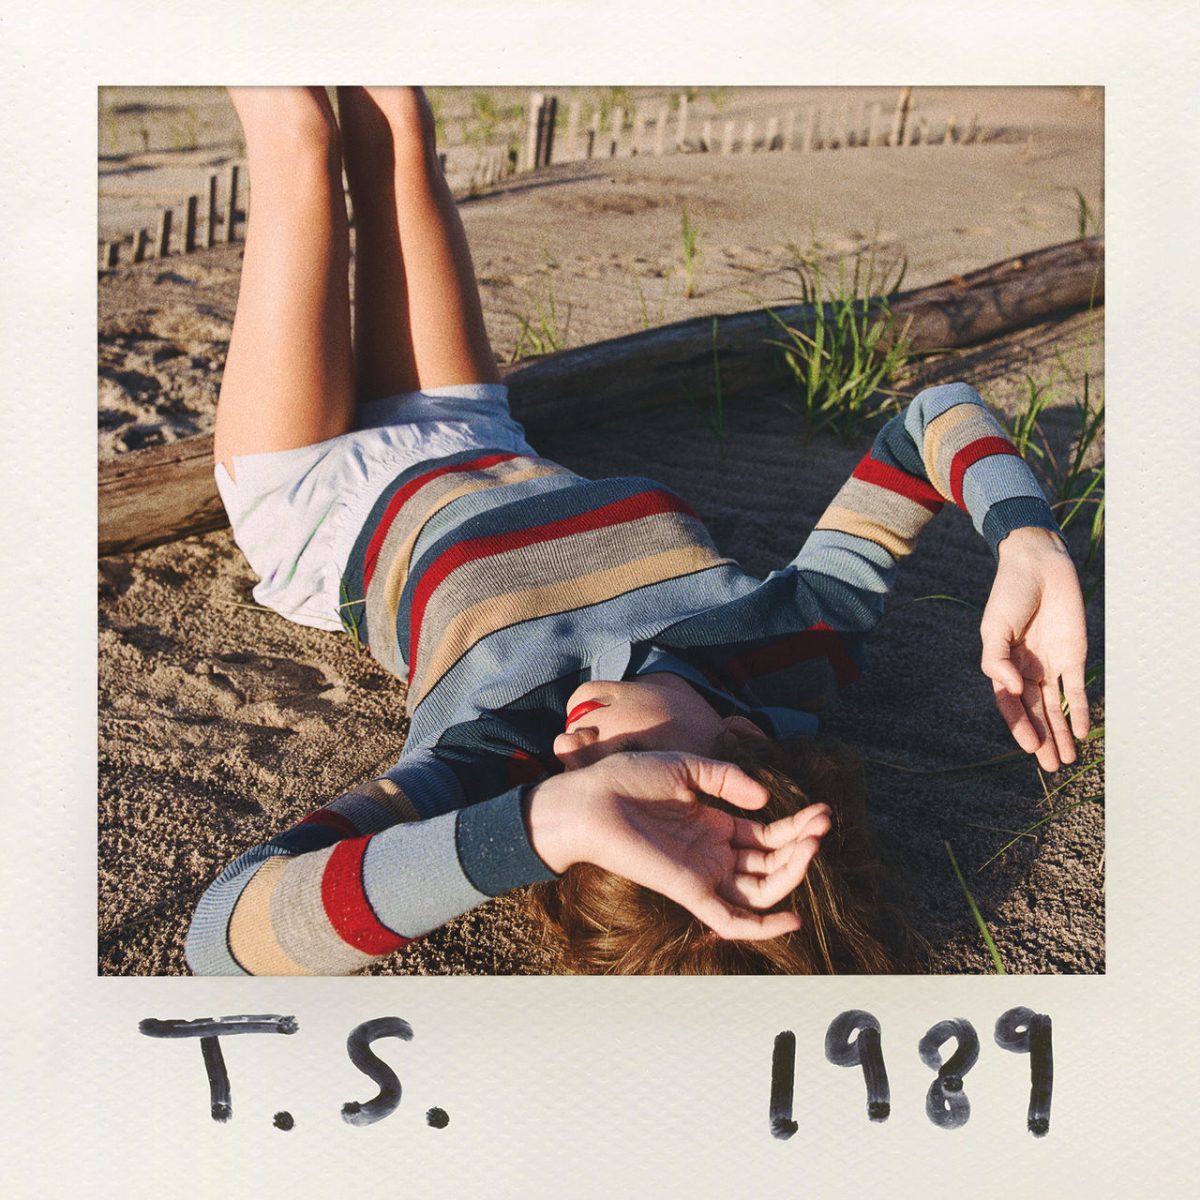 Anna Maxwell shares her thoughts on 1989 (Taylors Version from an outside perspective.